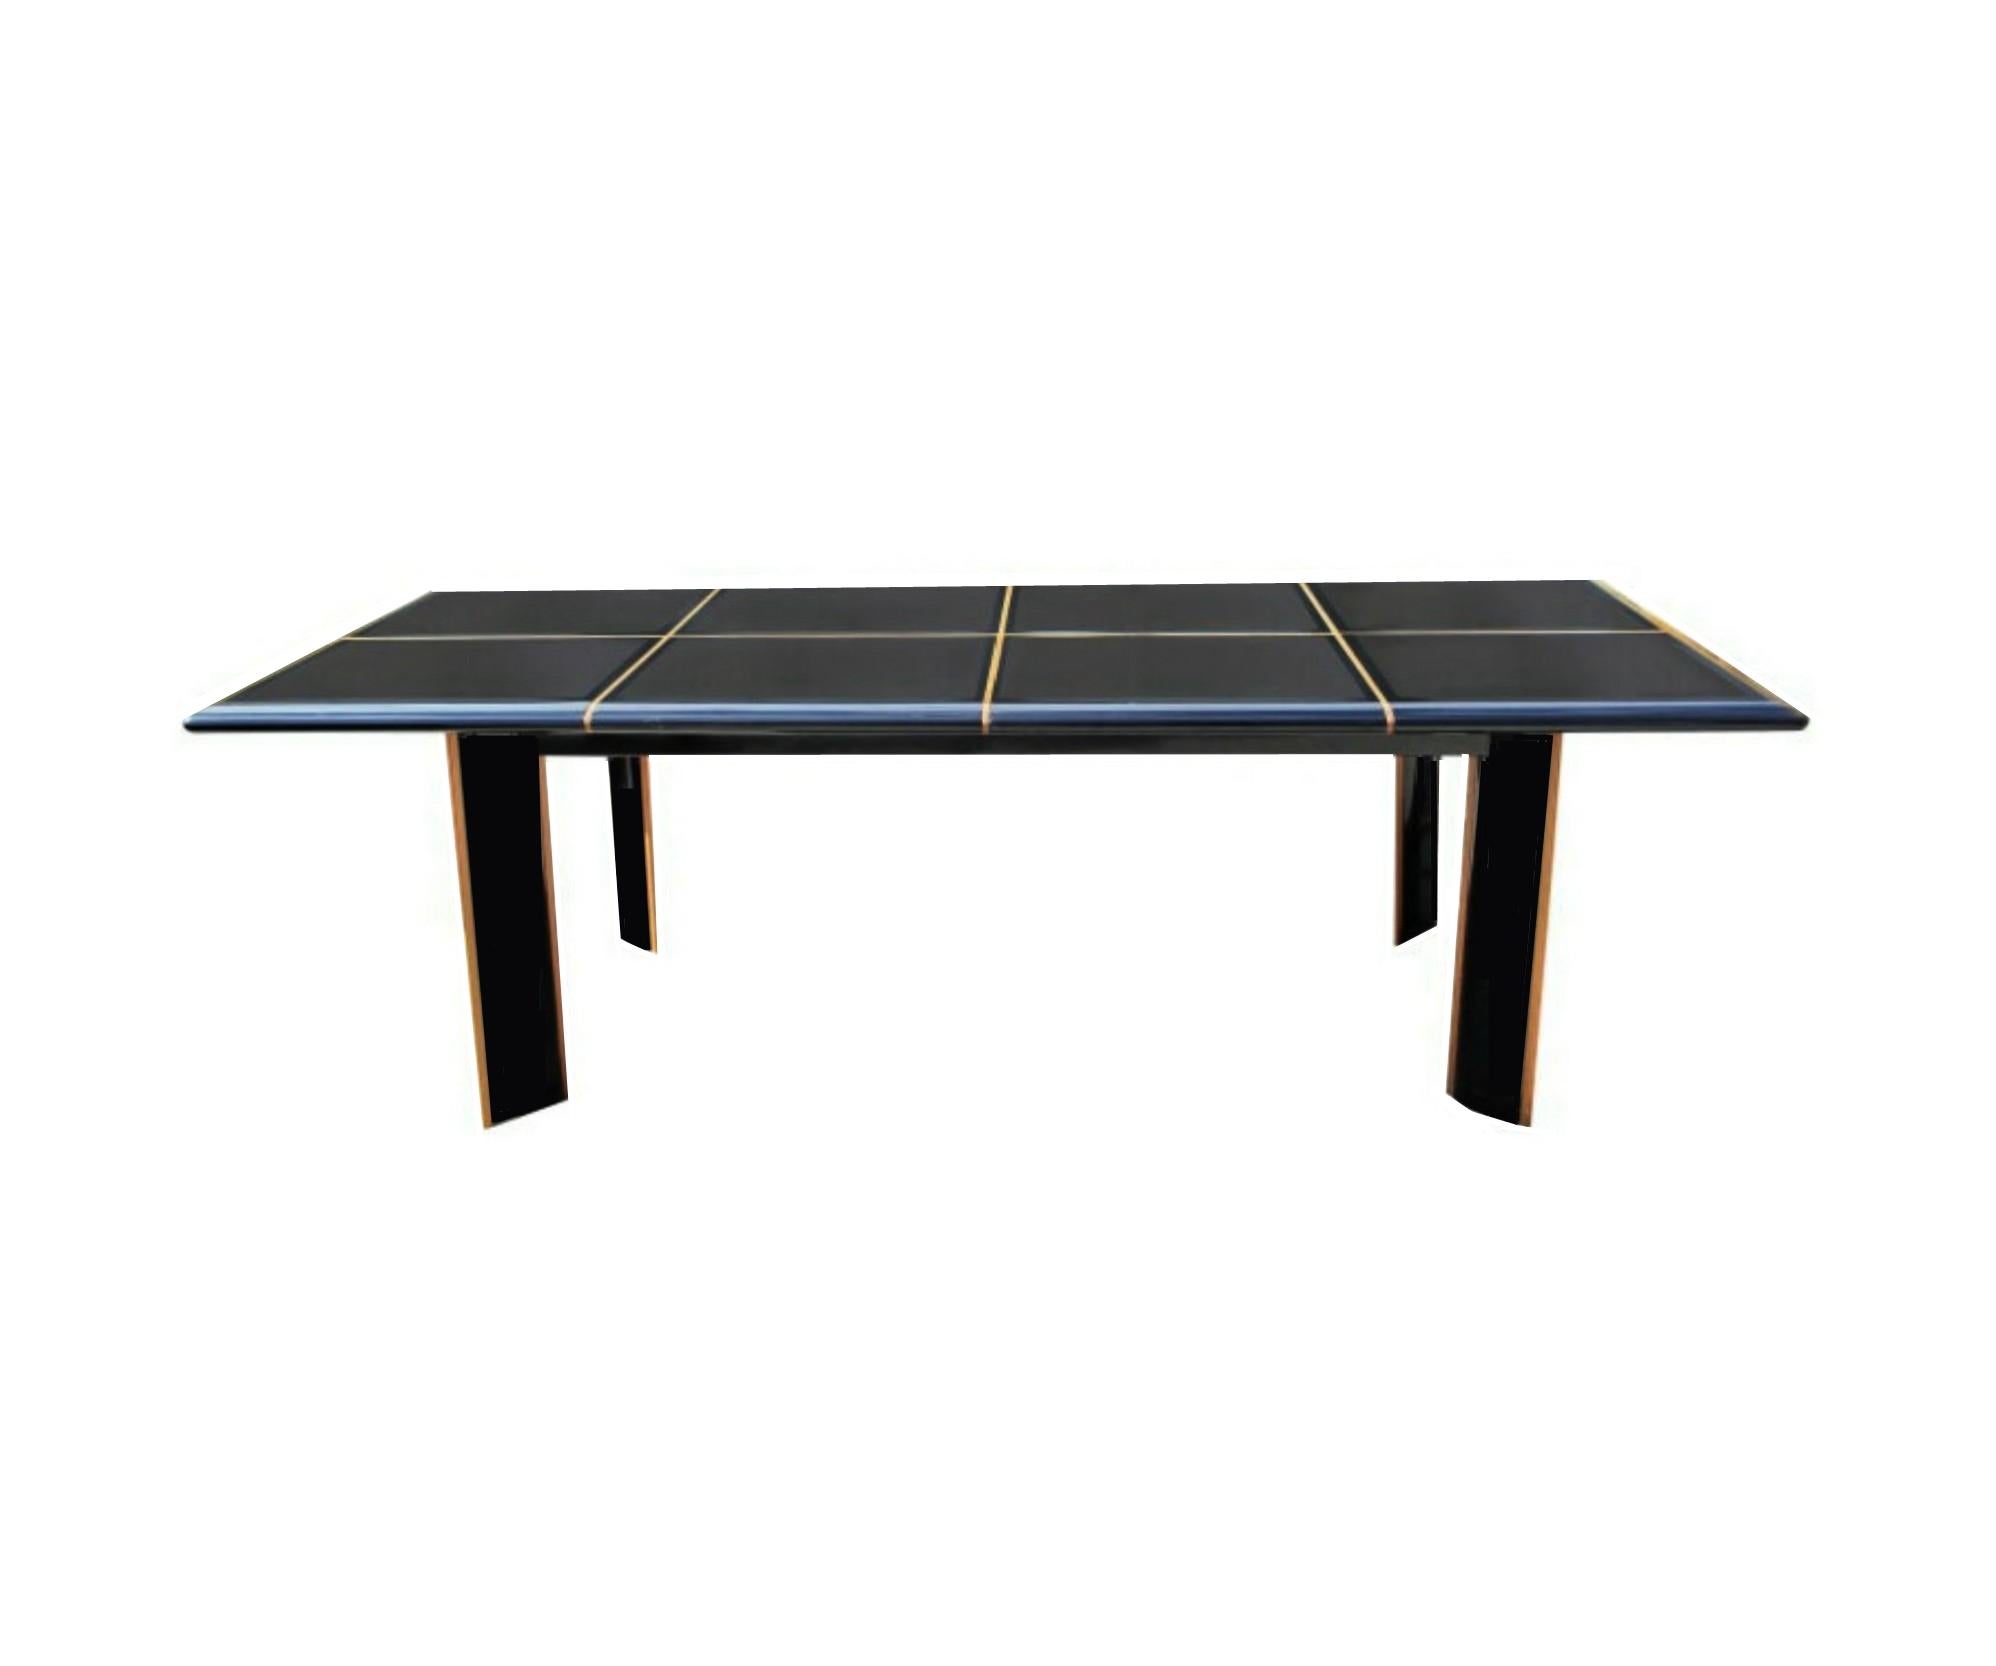 Modern Pierre Cardin Roche Bobois Italian Lacquer Glass Dining Room Conference Table For Sale